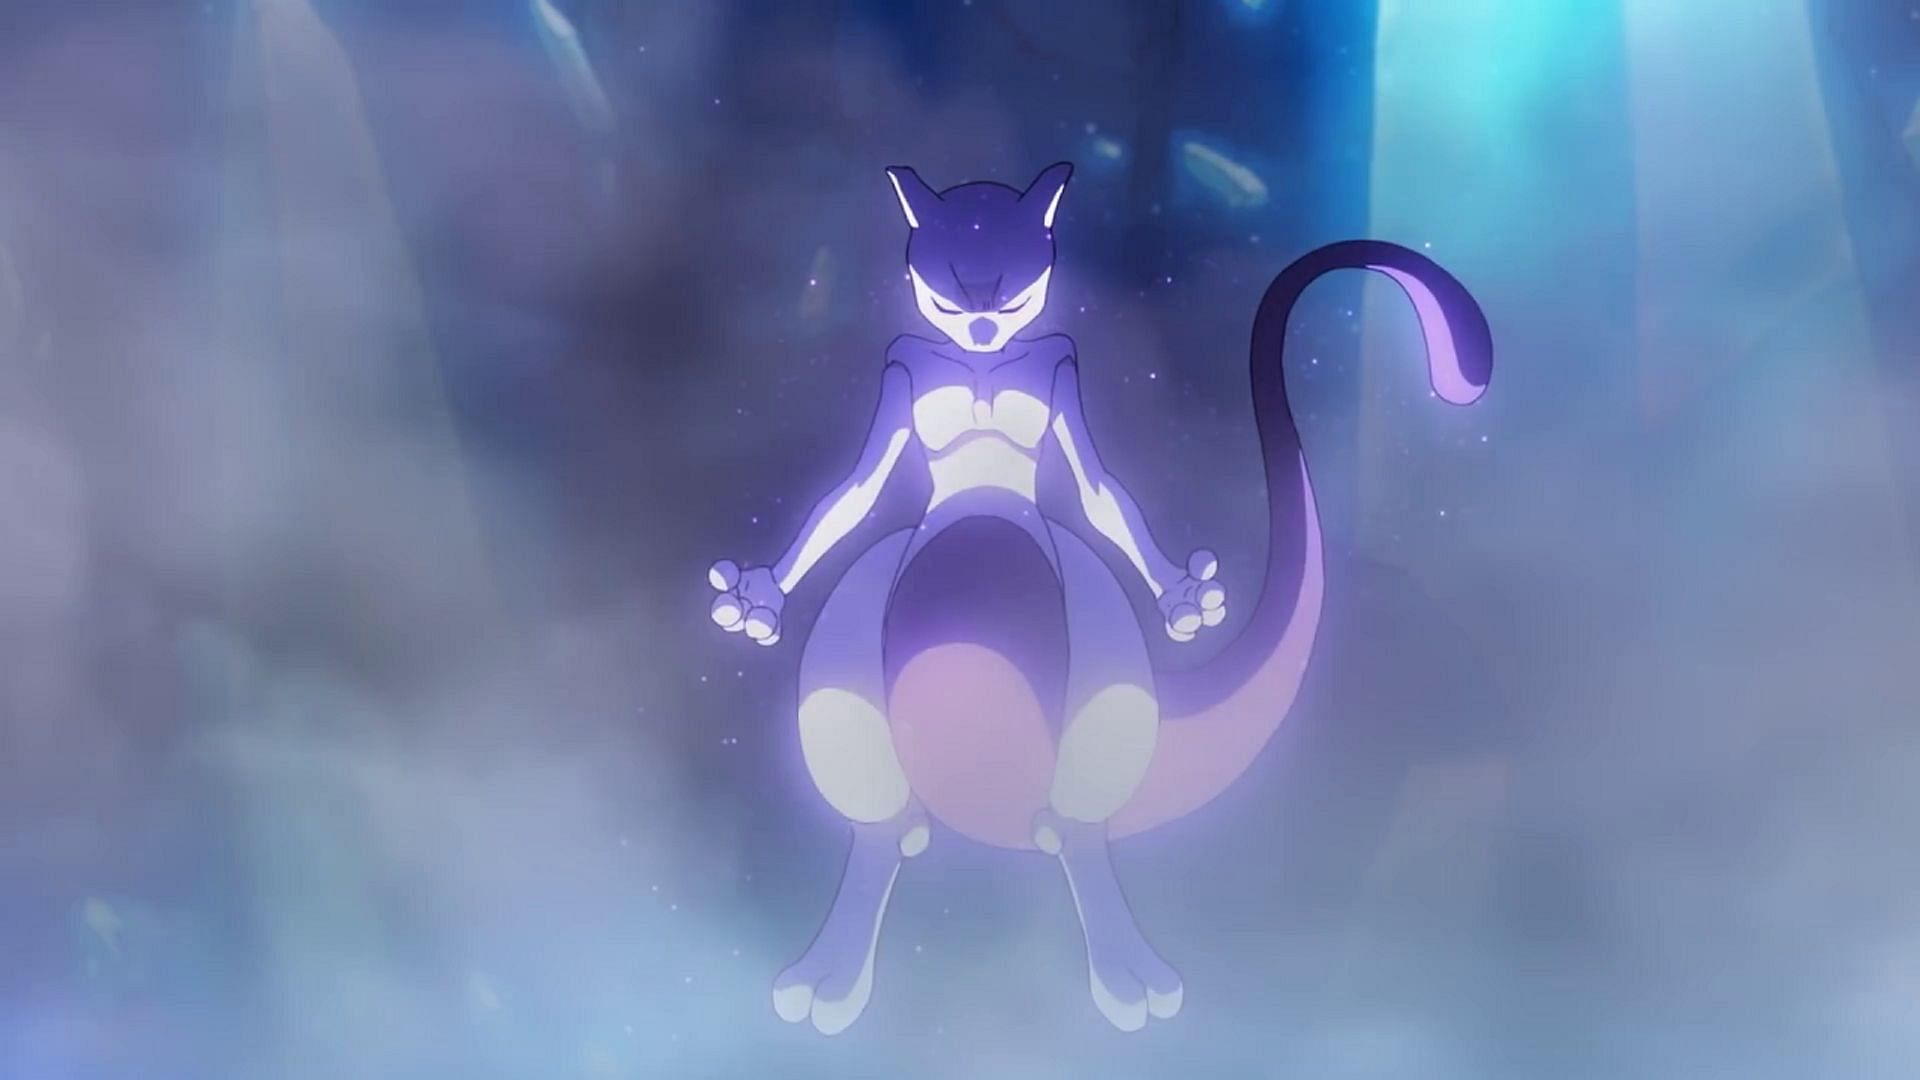 Mewtwo as it appears in Pokemon Evolutions (Image via The Pokemon Company)